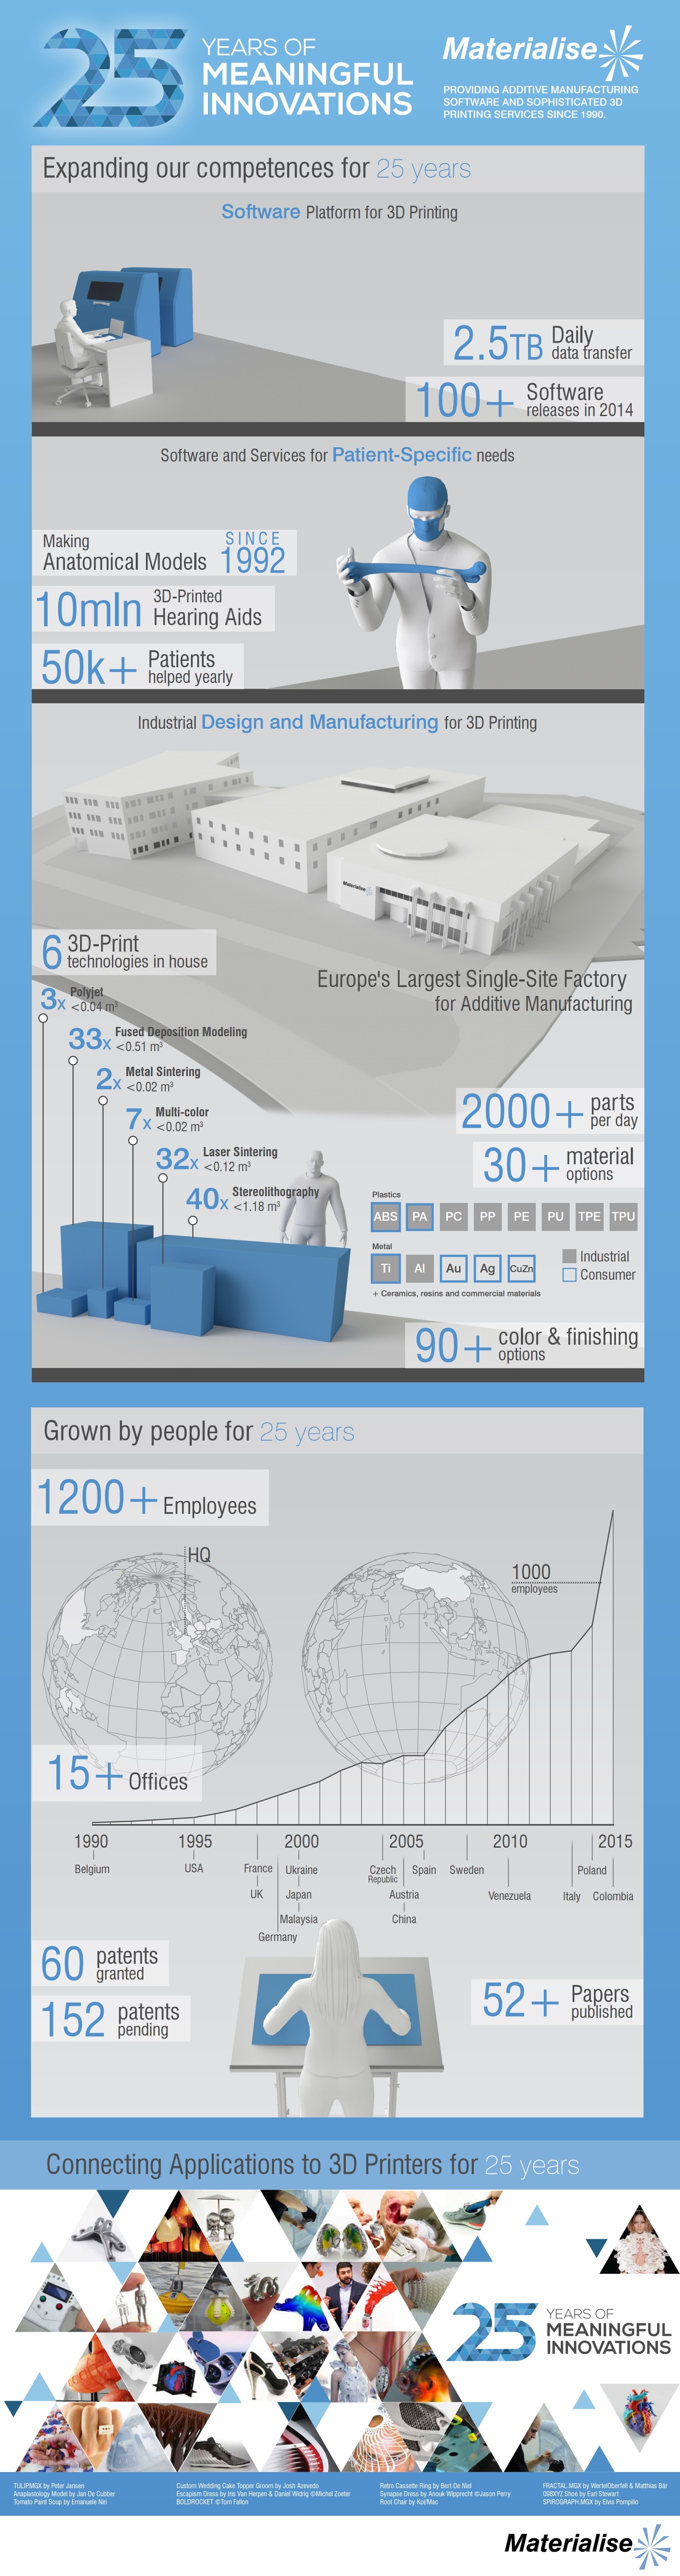 history of 3d printing infographic